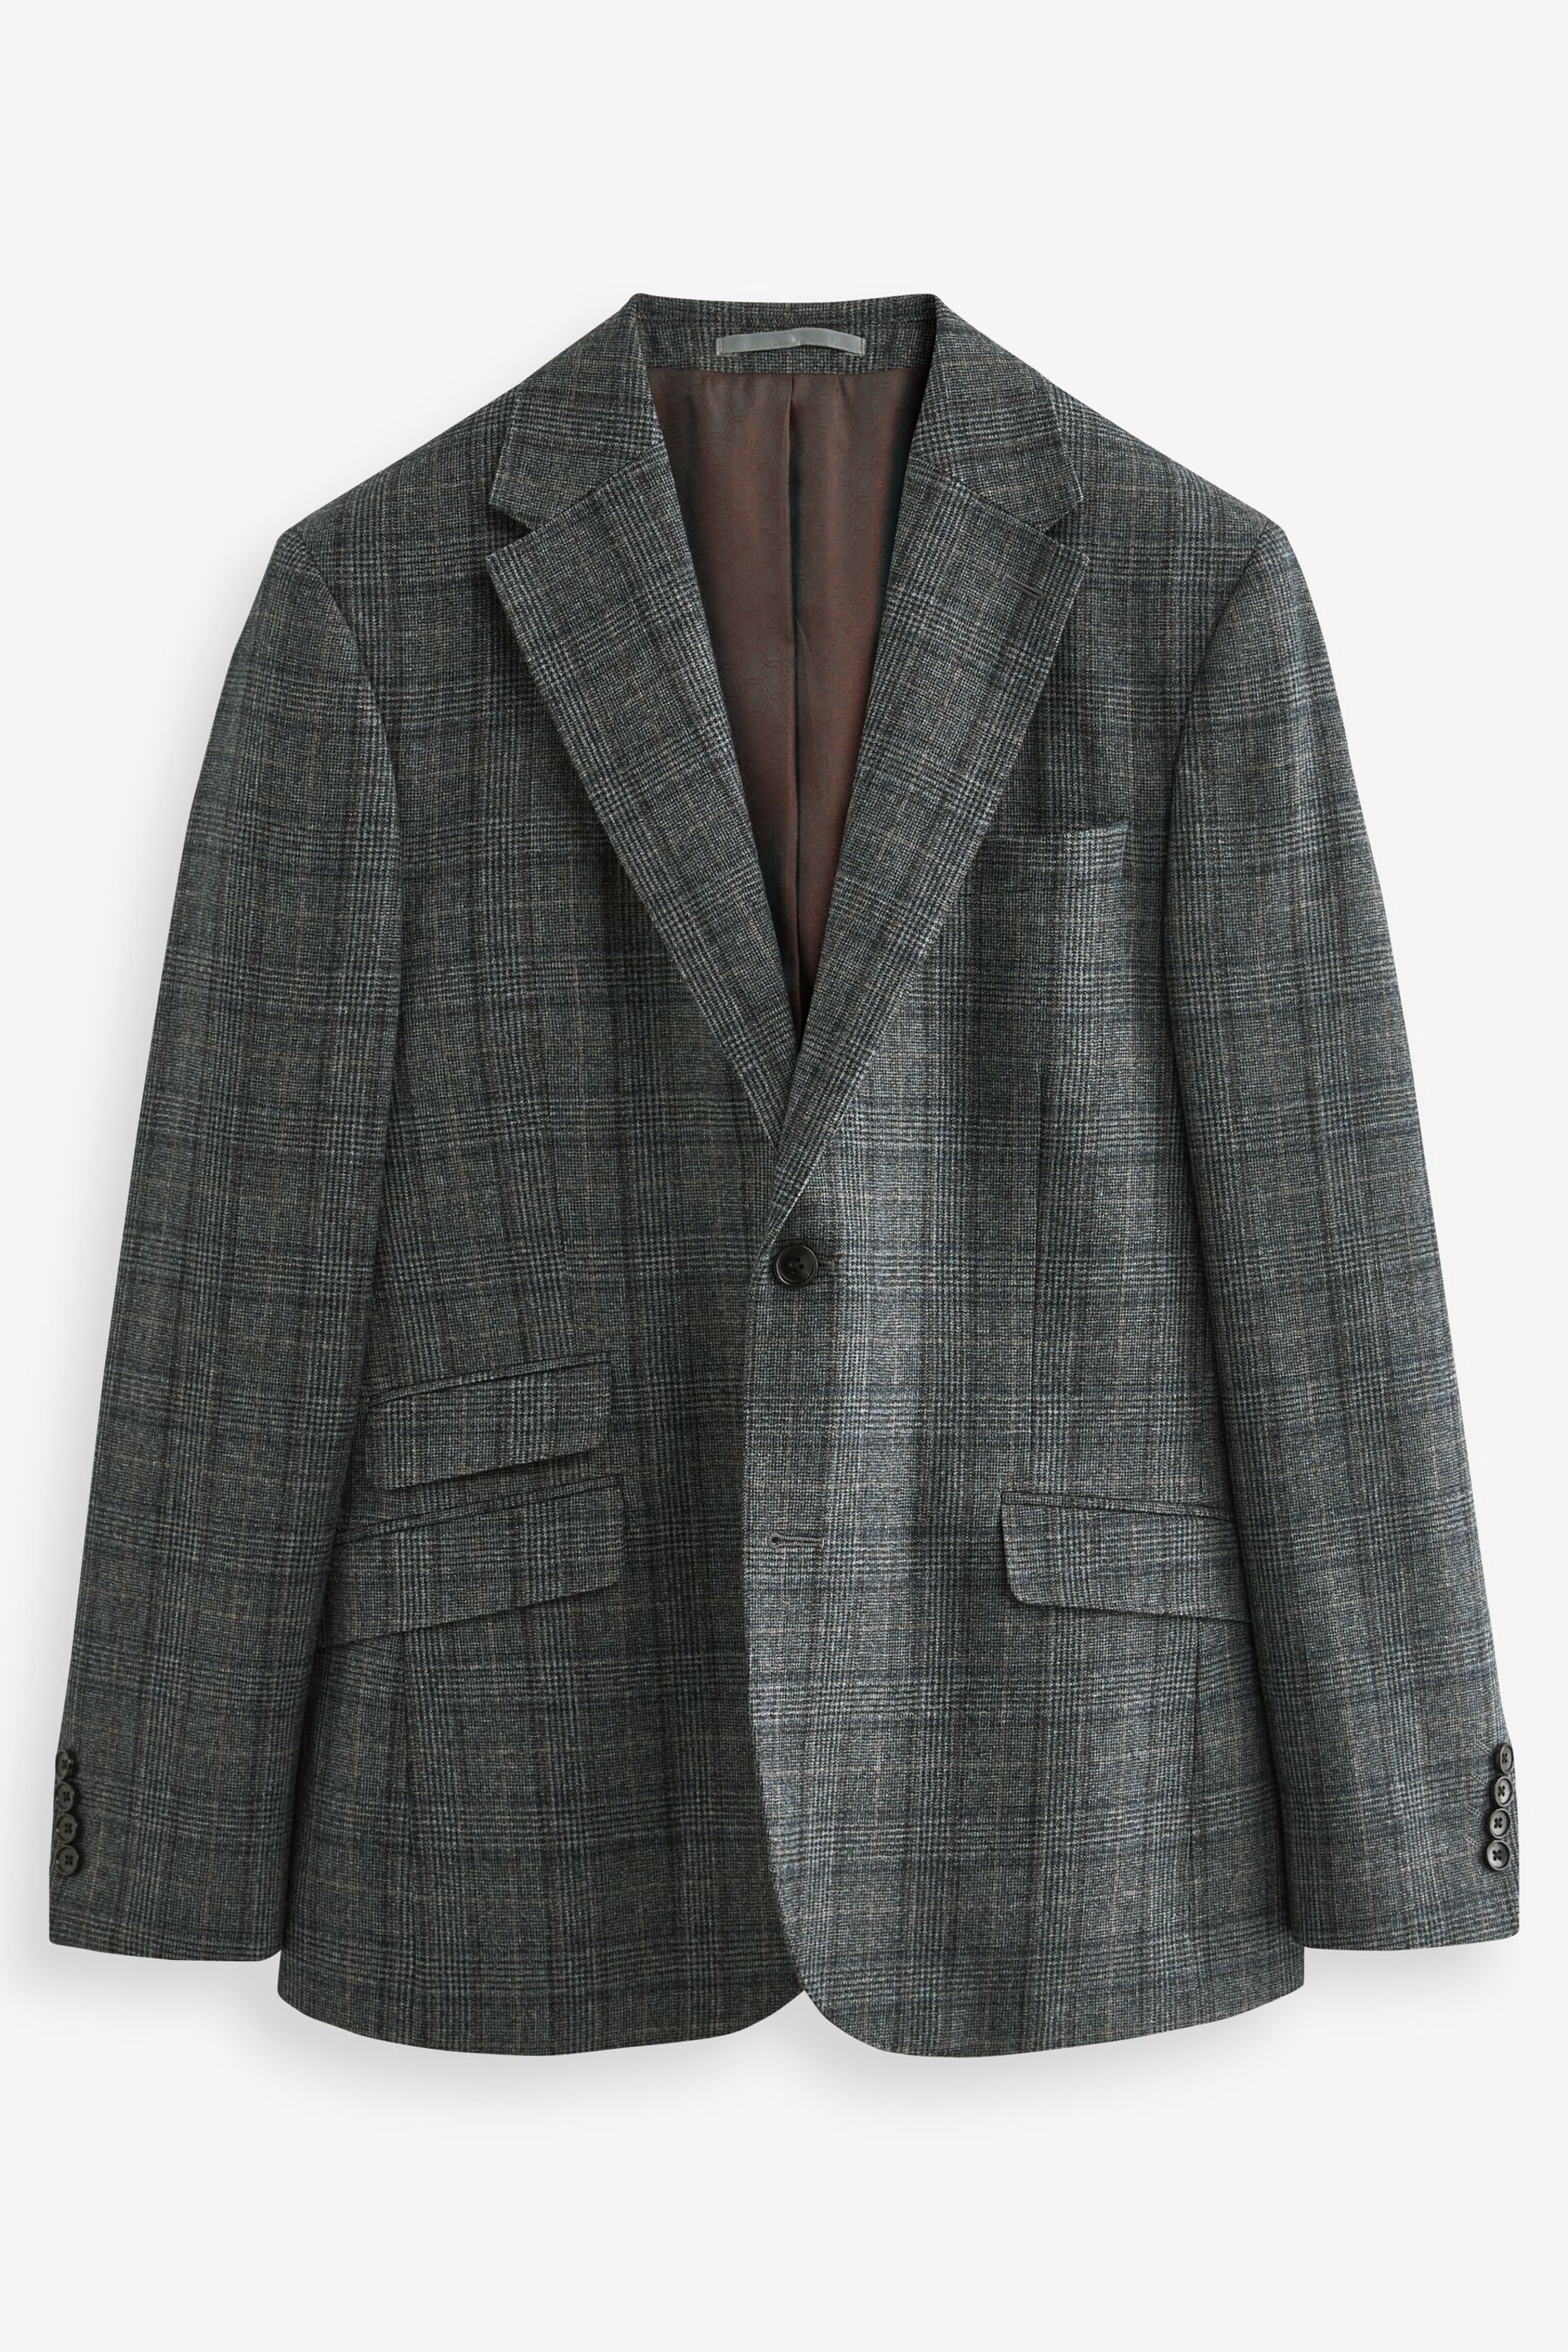 Grey Slim Fit Signature Check Suit: Jacket - Image 7 of 12